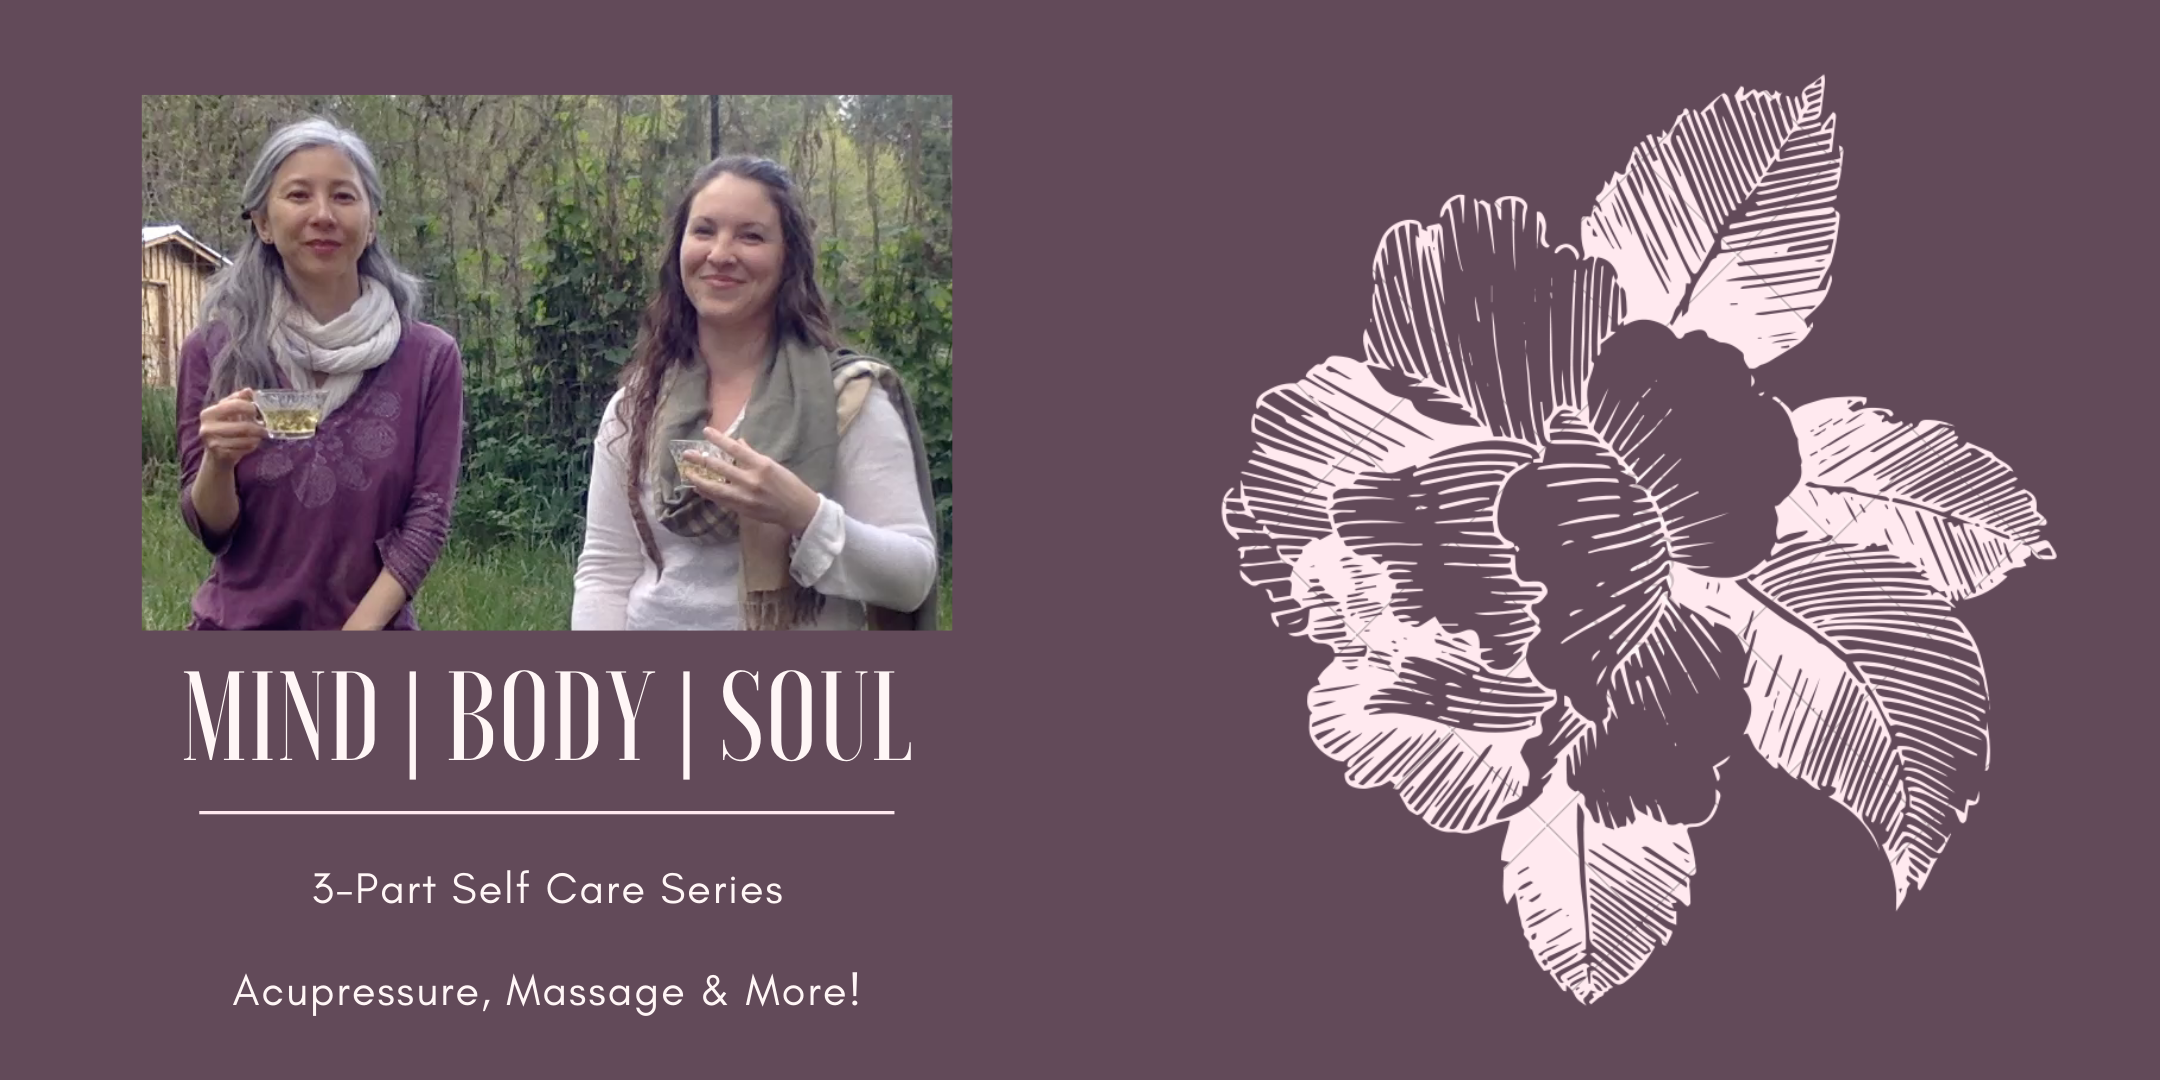 Mind Body Soul: A Three Part Series on Self-Care Techniques